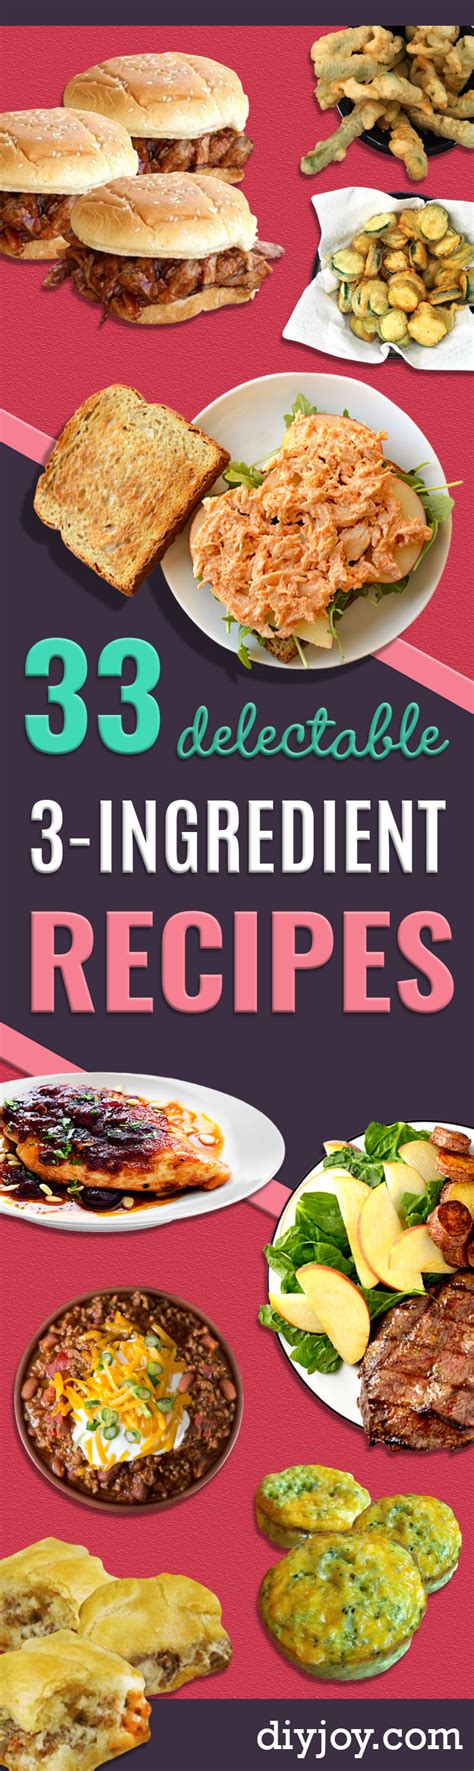 33 Delectable 3 Ingredient Recipes